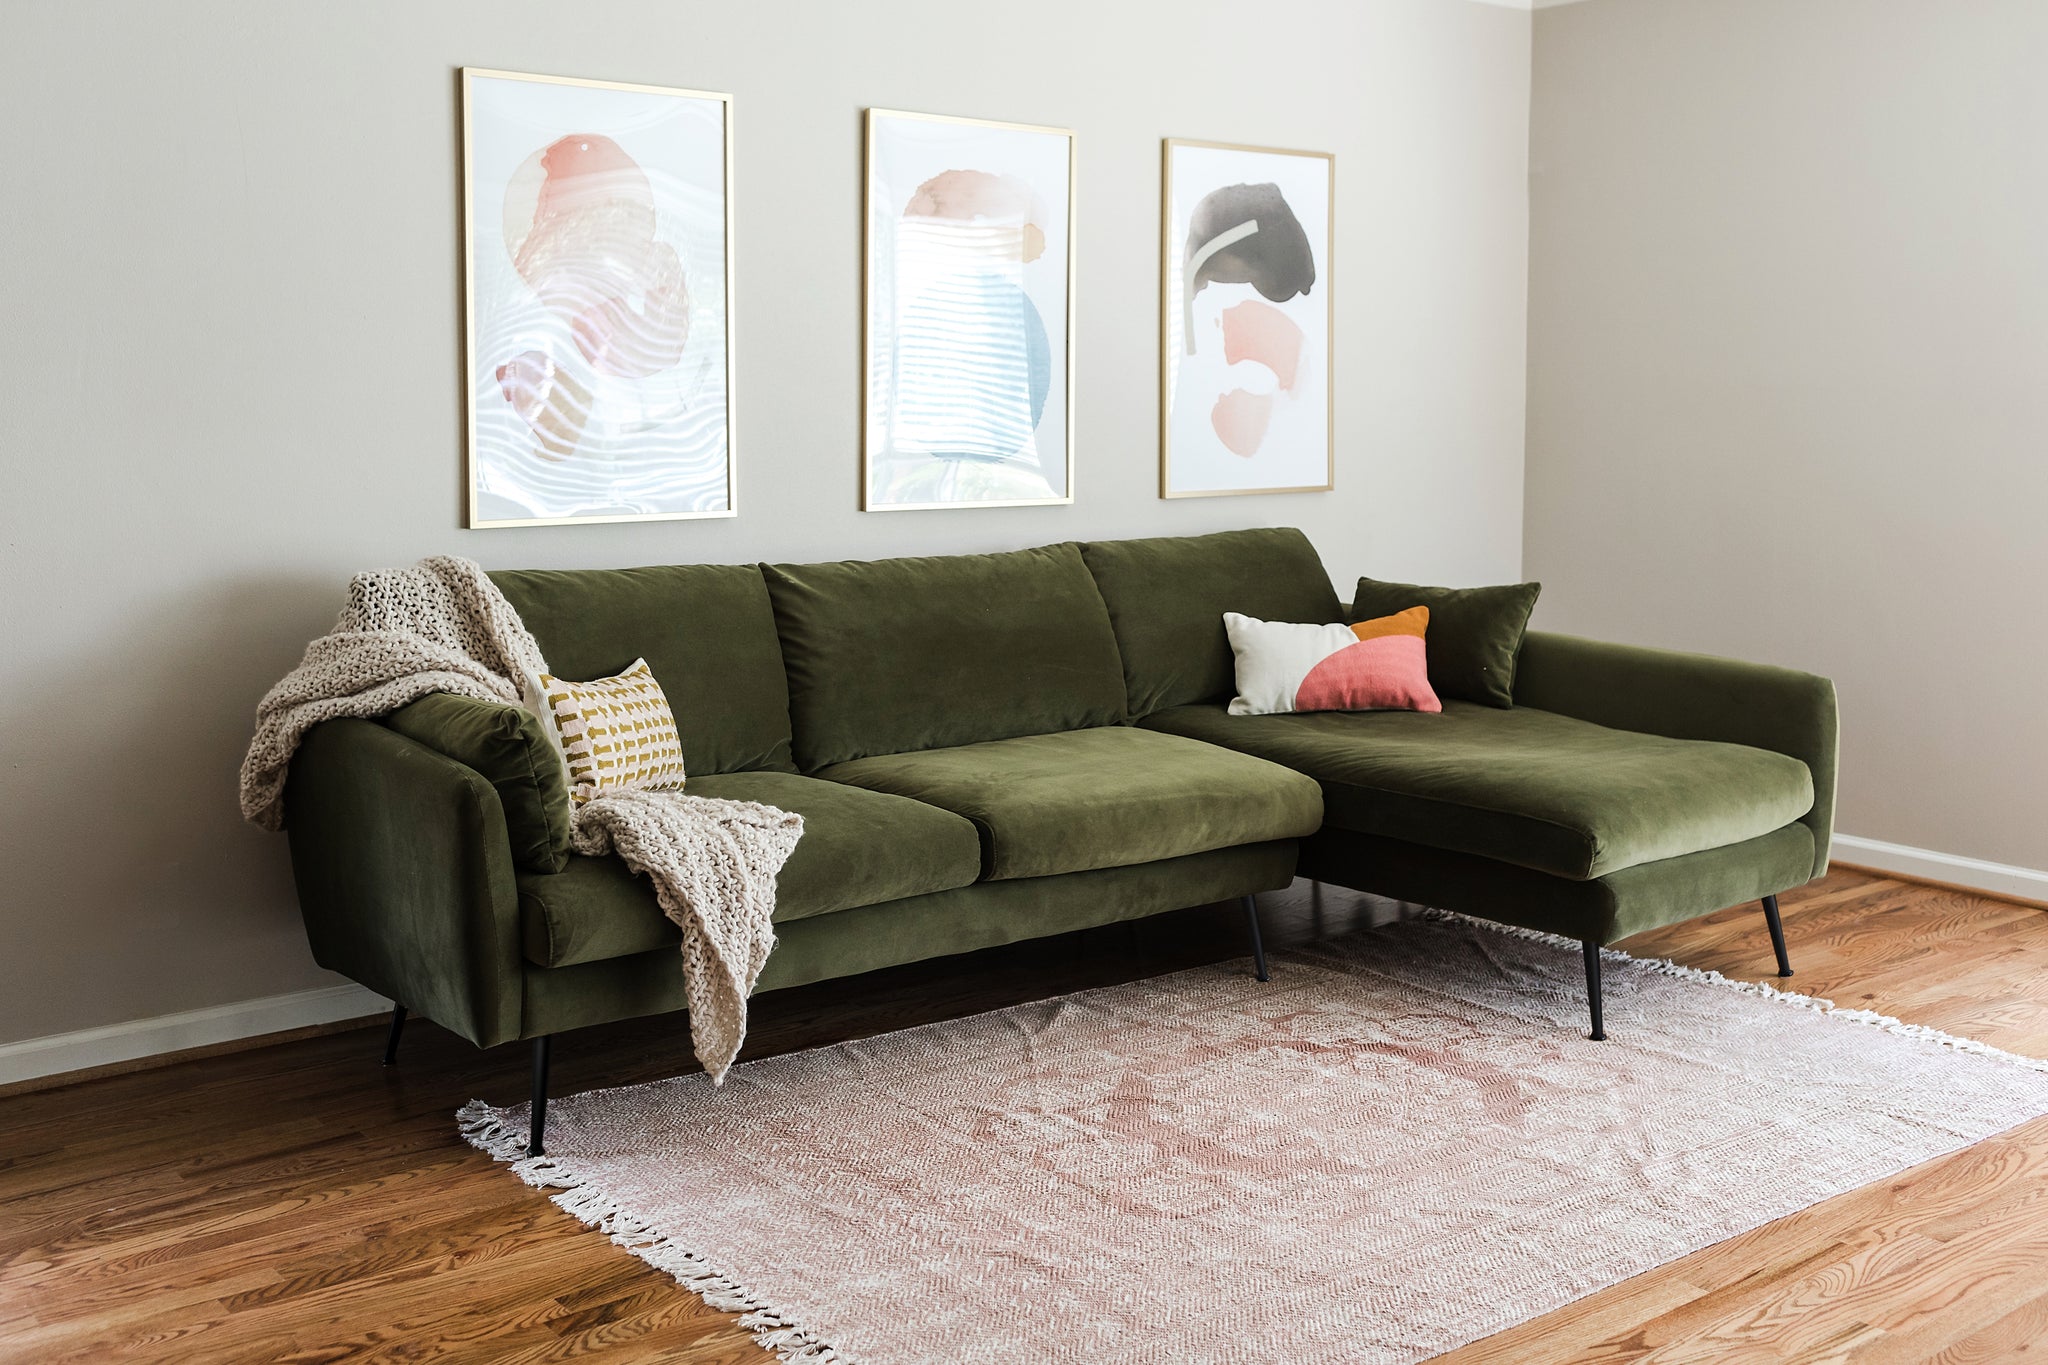 park sectional sofa shown in olive velvet with black legs right facing